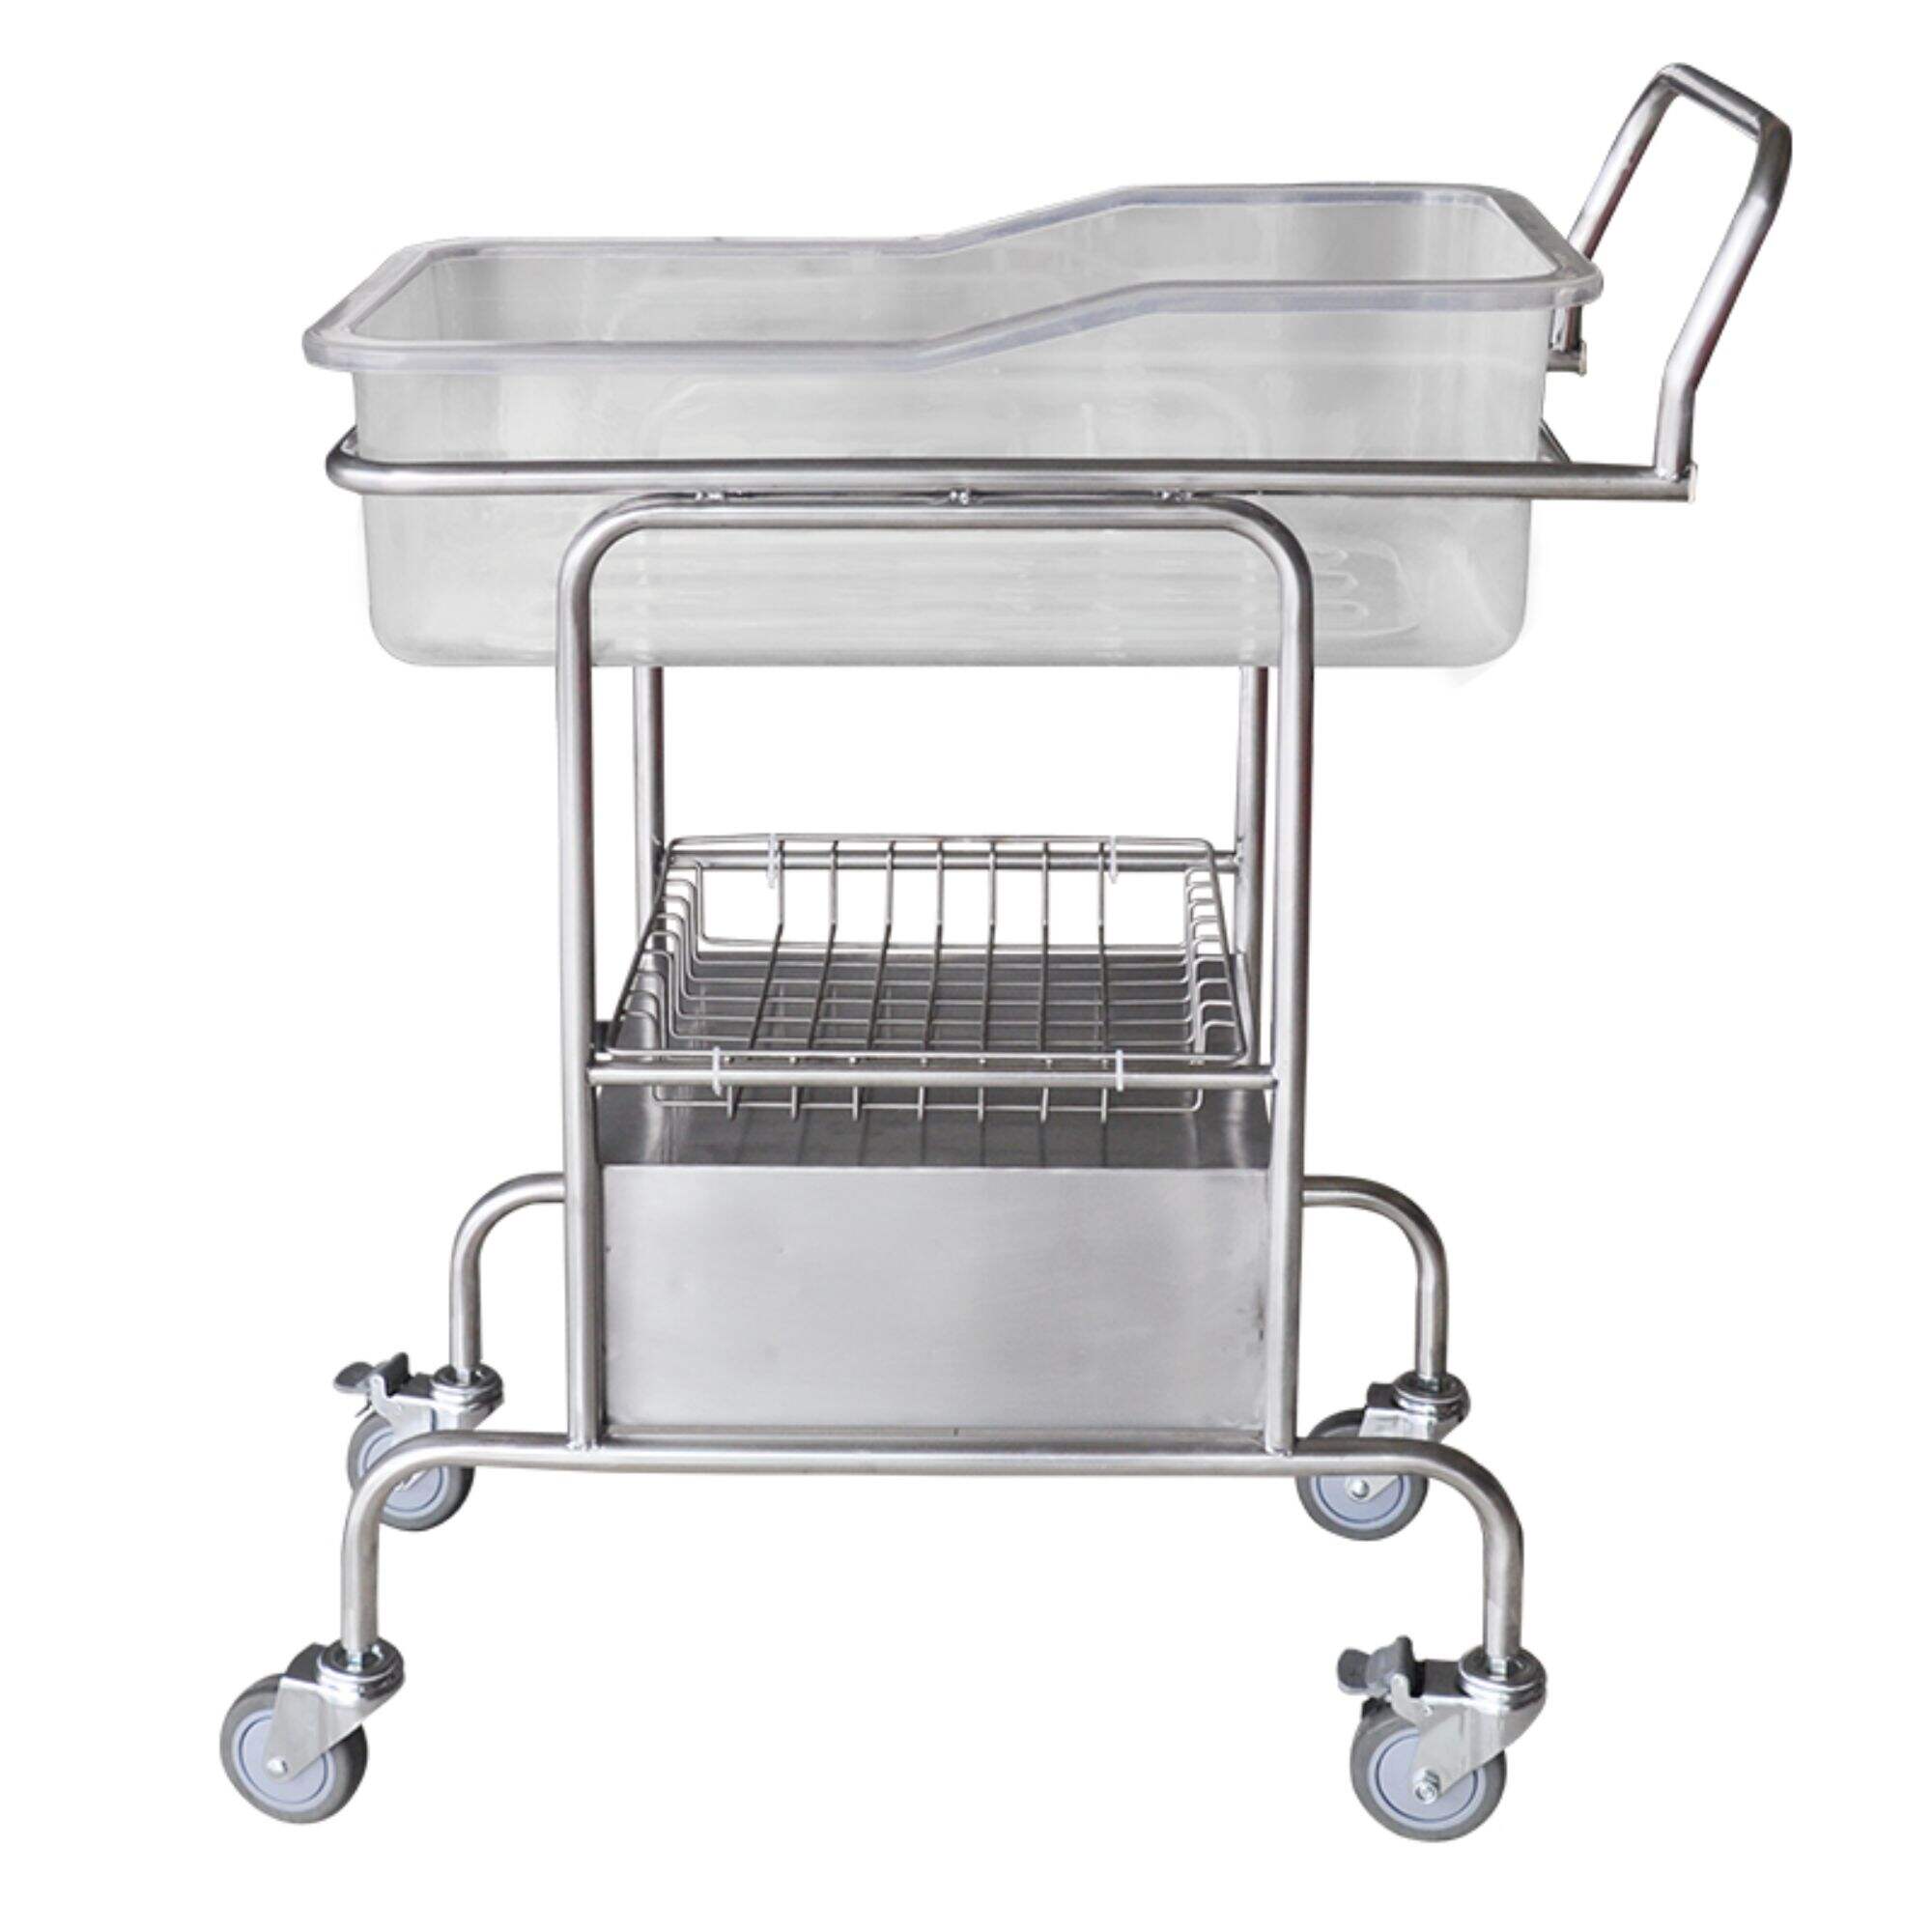 YFY018L-S1 Stainless Steel Baby Cart